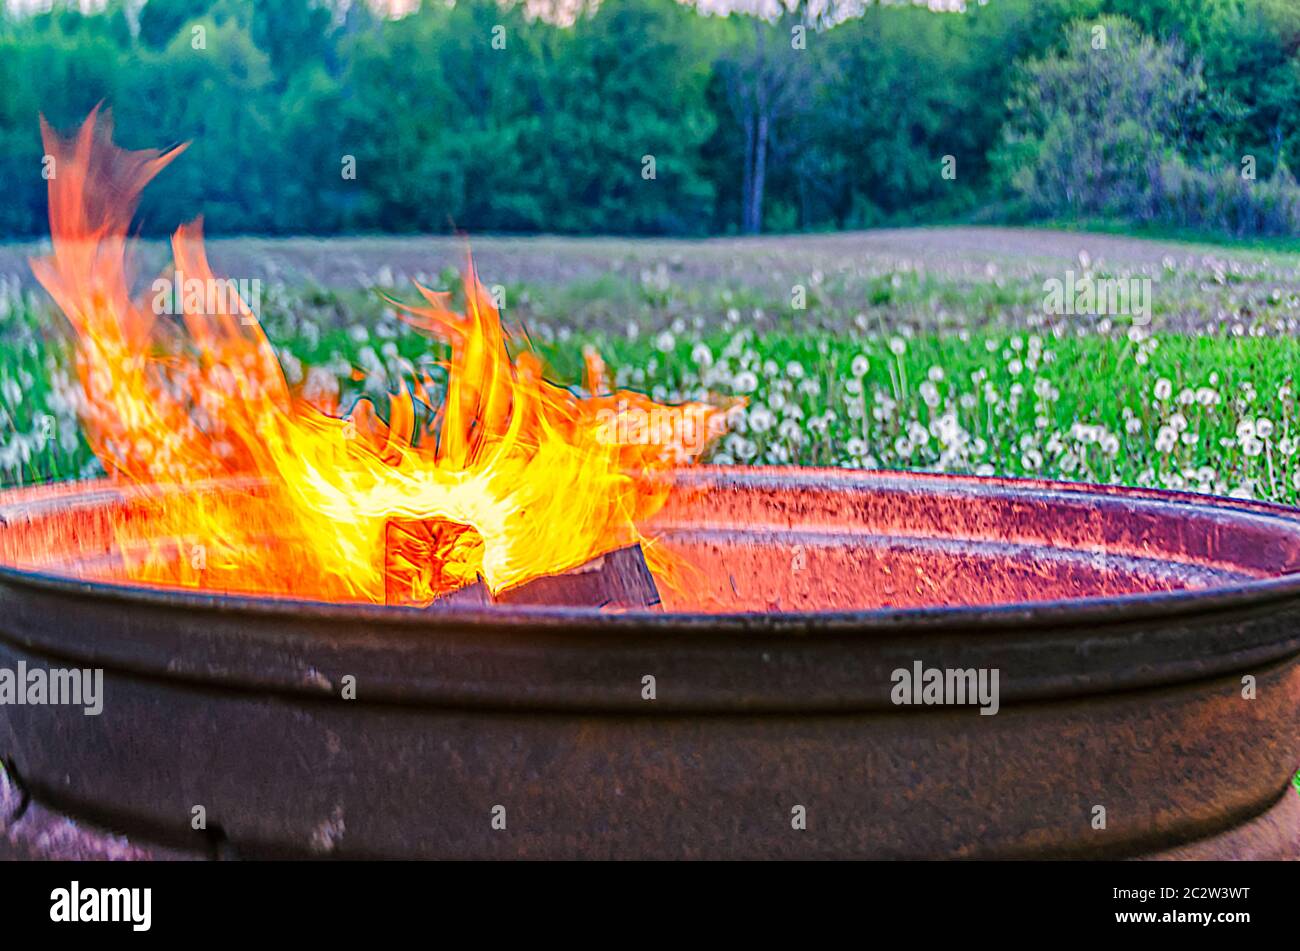 Flames rise from logs being burnt in a bonfire lit inside a metal drum. Stock Photo